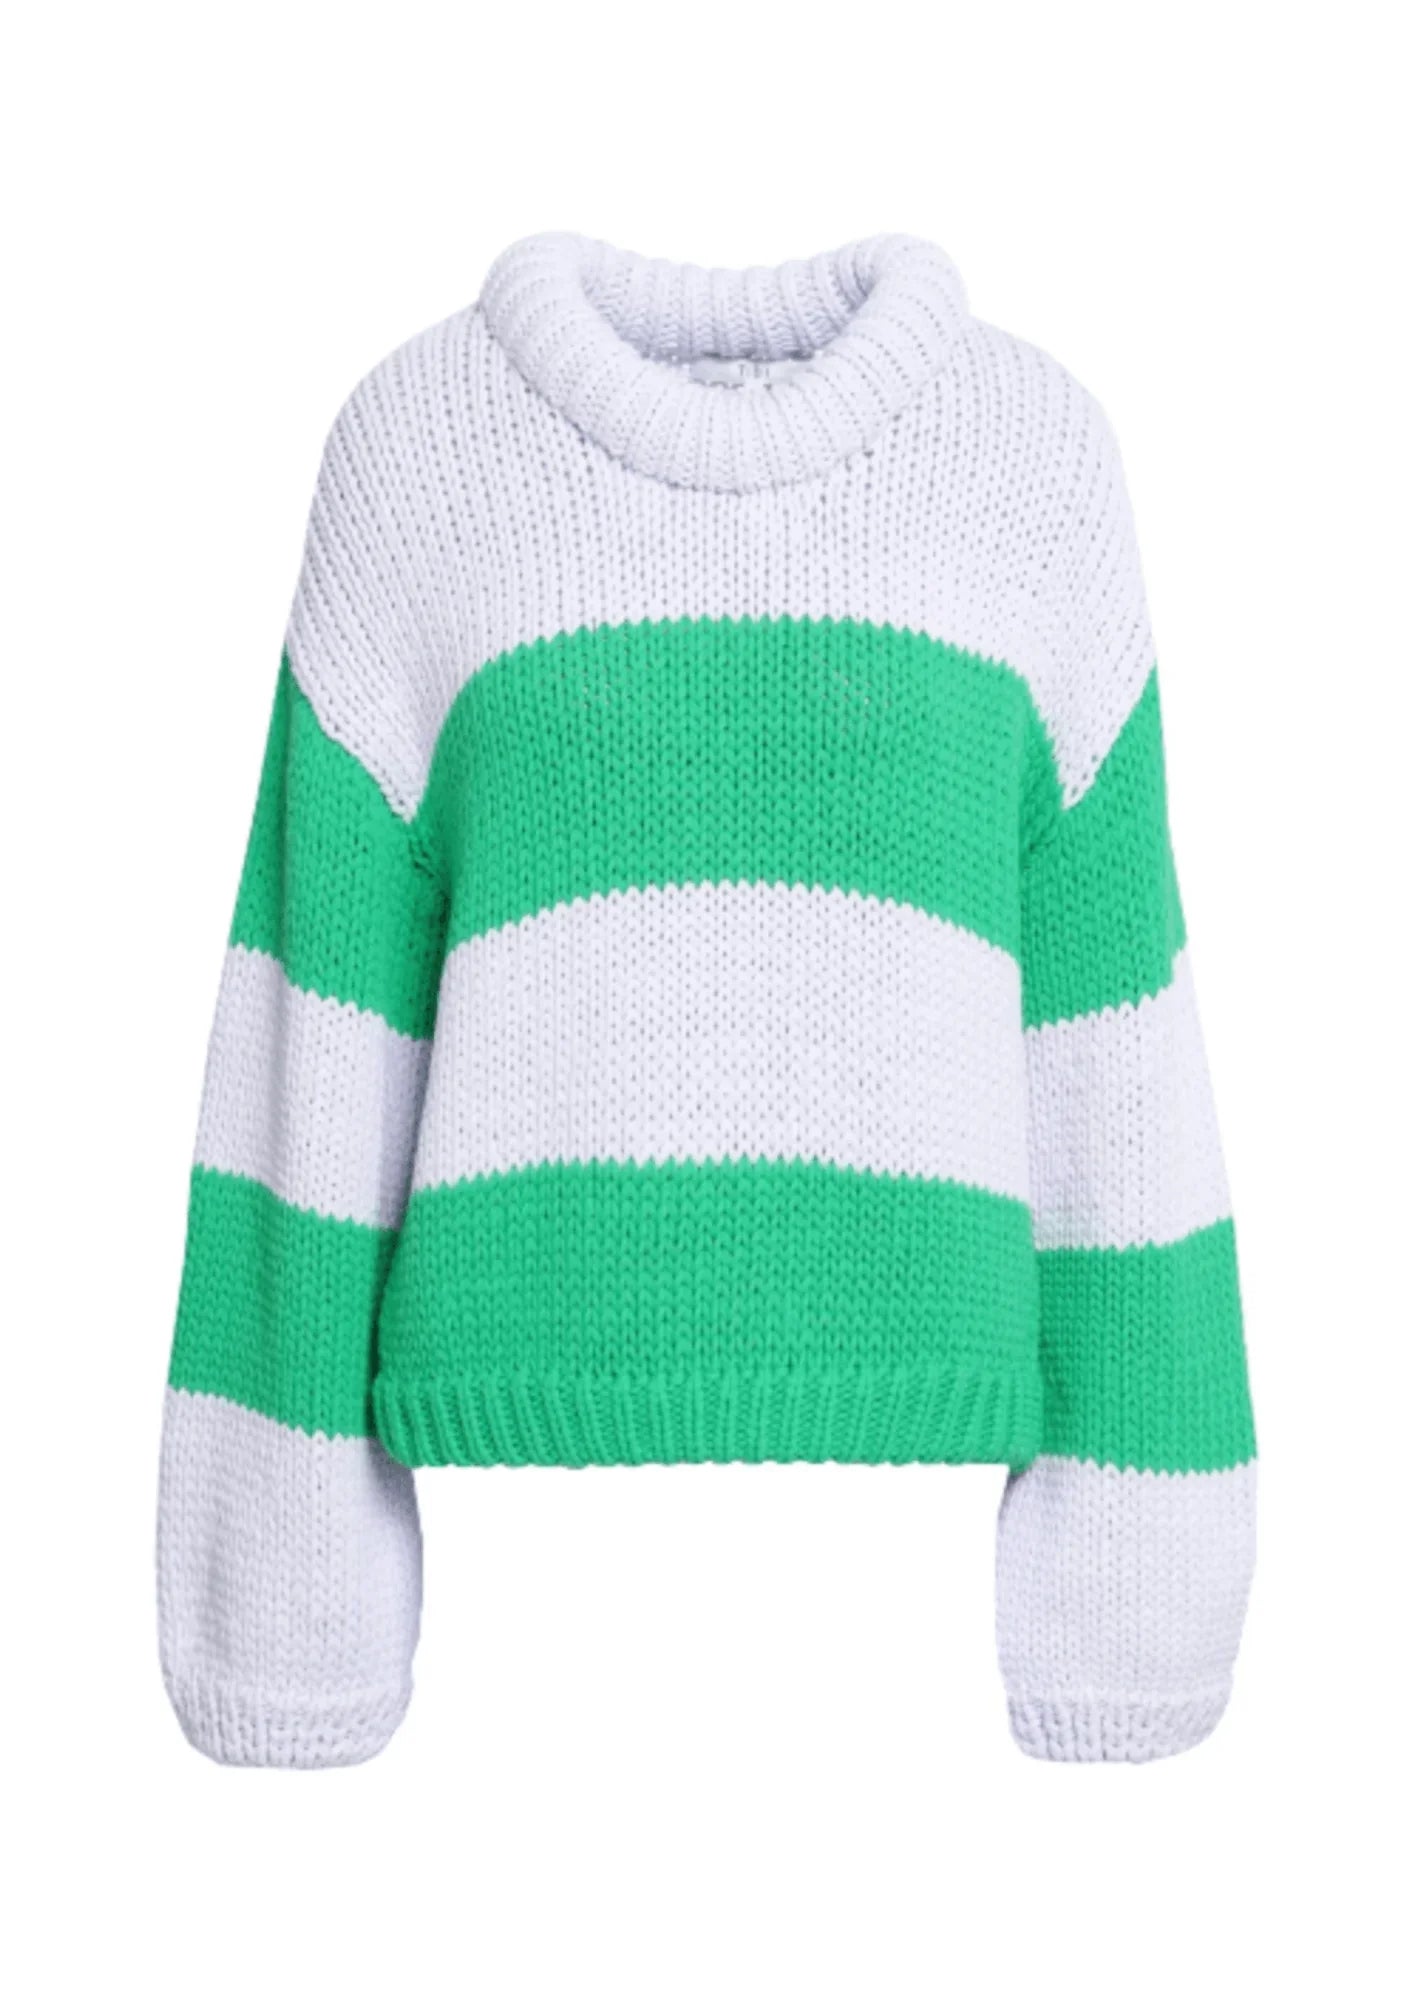 WHITE AND GREEN STRIPED SWEATER